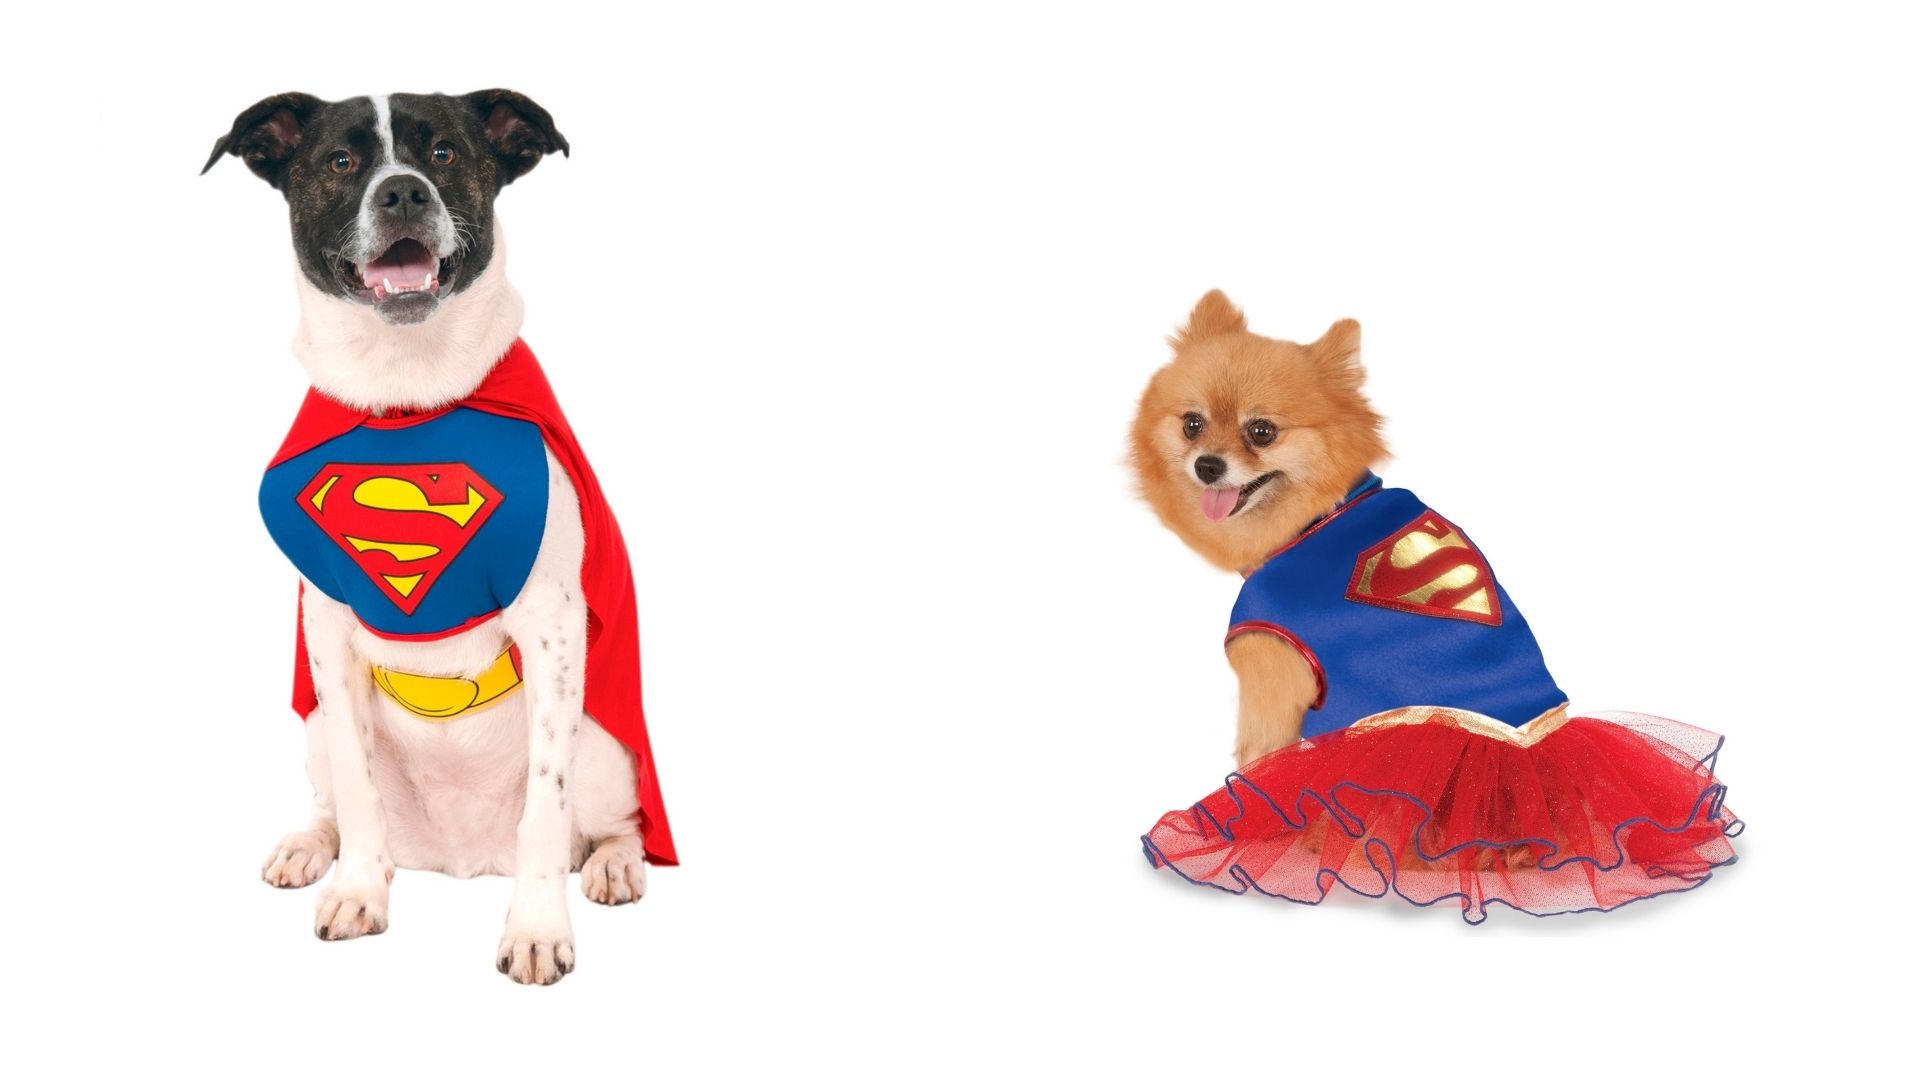 10 Pet Halloween Costumes For Your Paranormal Pooch